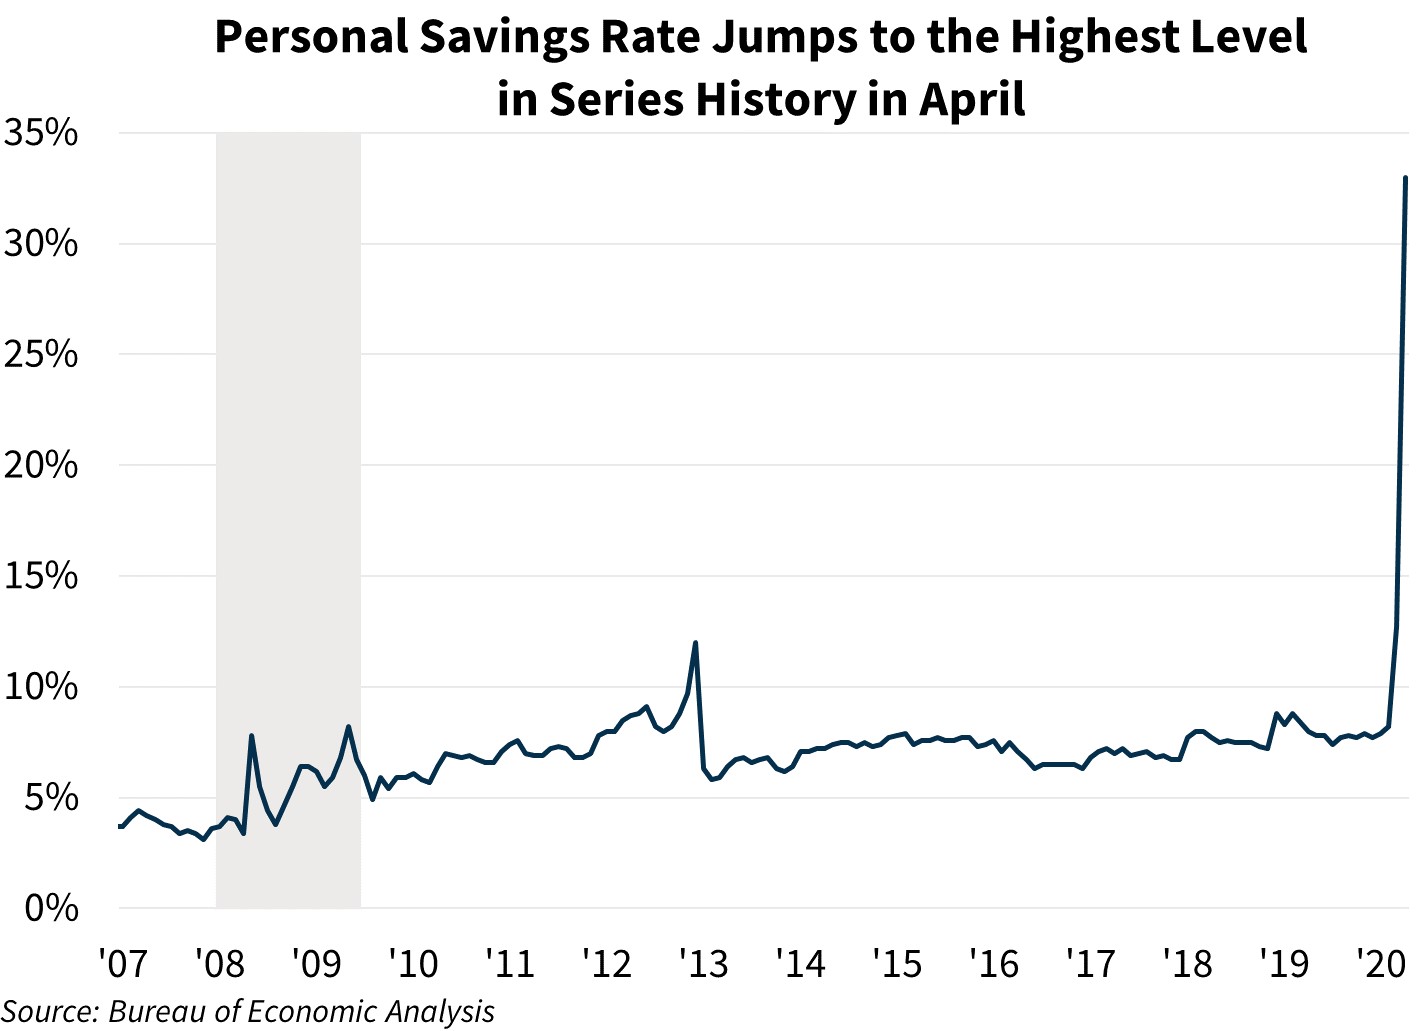 Personal Savings Rate Jumps to the Highest Level in Series History in April